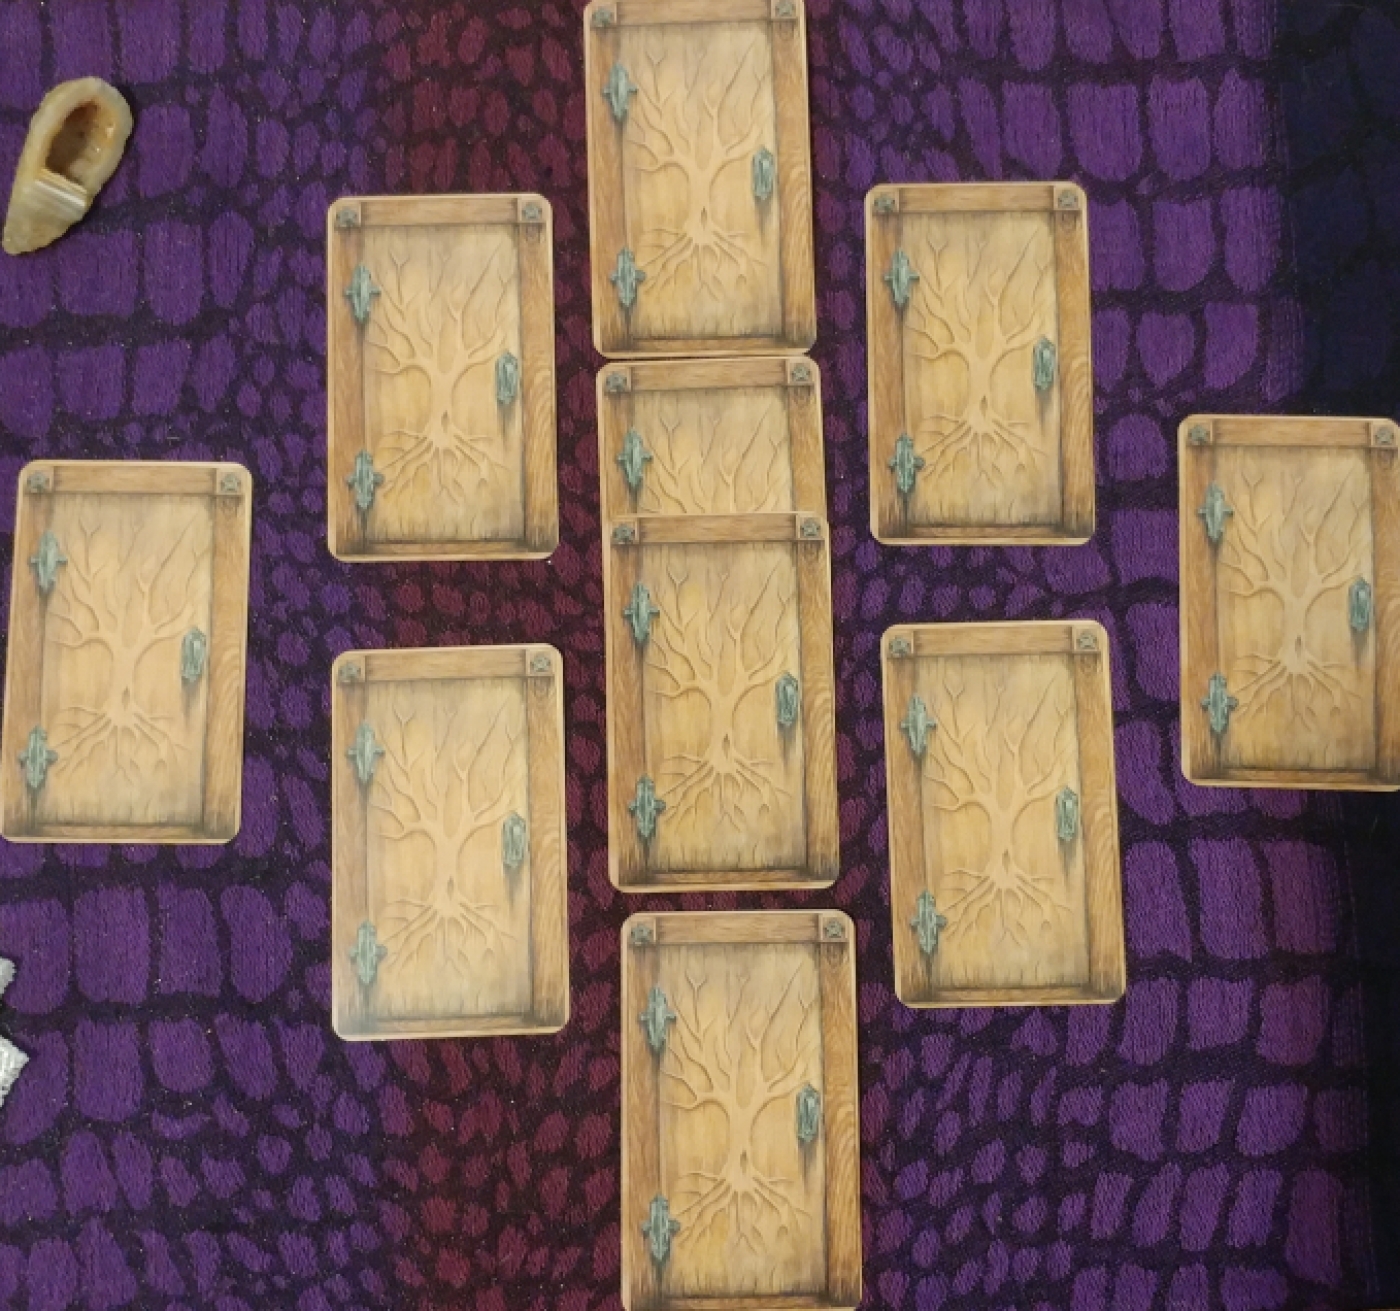 Ten matching cards (faced-down) that resemble unopened wooden doors, hinting at the unknown. The frame of each door is of a darker wood, two pentagrams etched in the top corners. A naked tree is etched into the door with the roots reaching down towards the earth, the branches reaching towards the sky; this encompasses the three realms of the deep influences of the past, the present moment, and the influences from above. The cards are arranged to resemble the vague shape of a cauldron (including a handle) with two extra cards inside the cauldron layout. There is a tawny-colored banded agate druzy to the left of the spread.